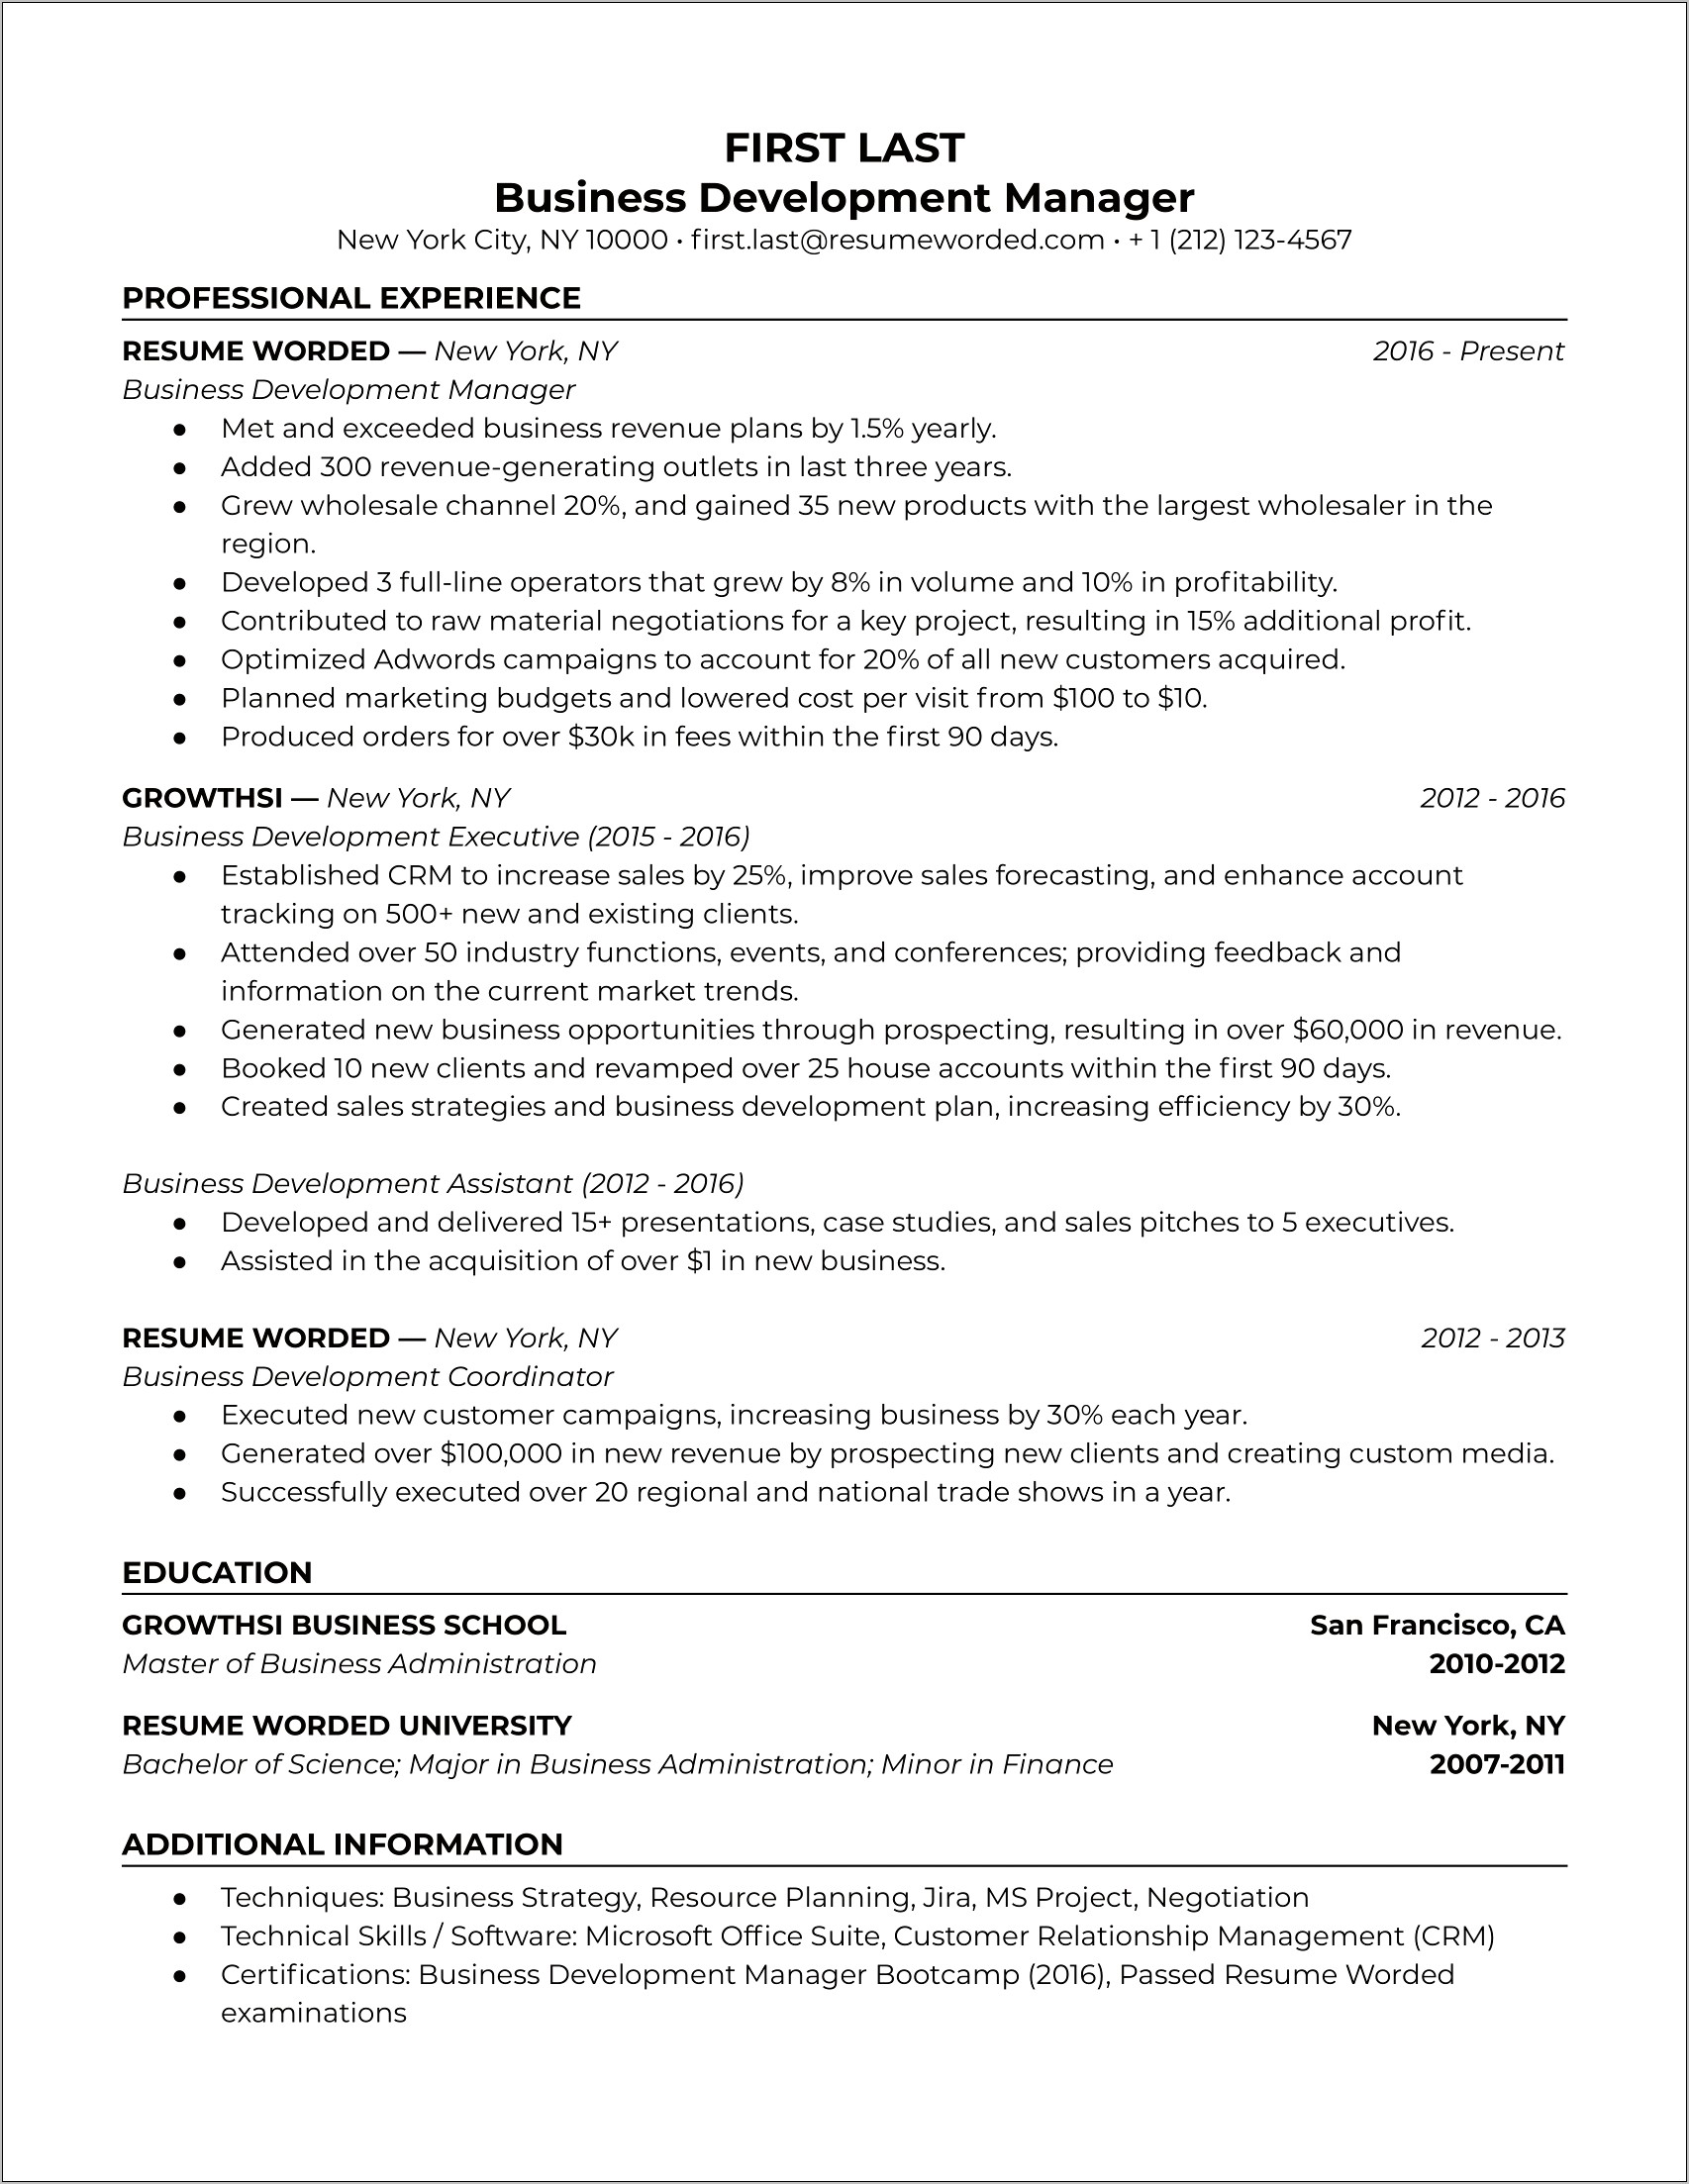 Objective Resume Growth Entry Level